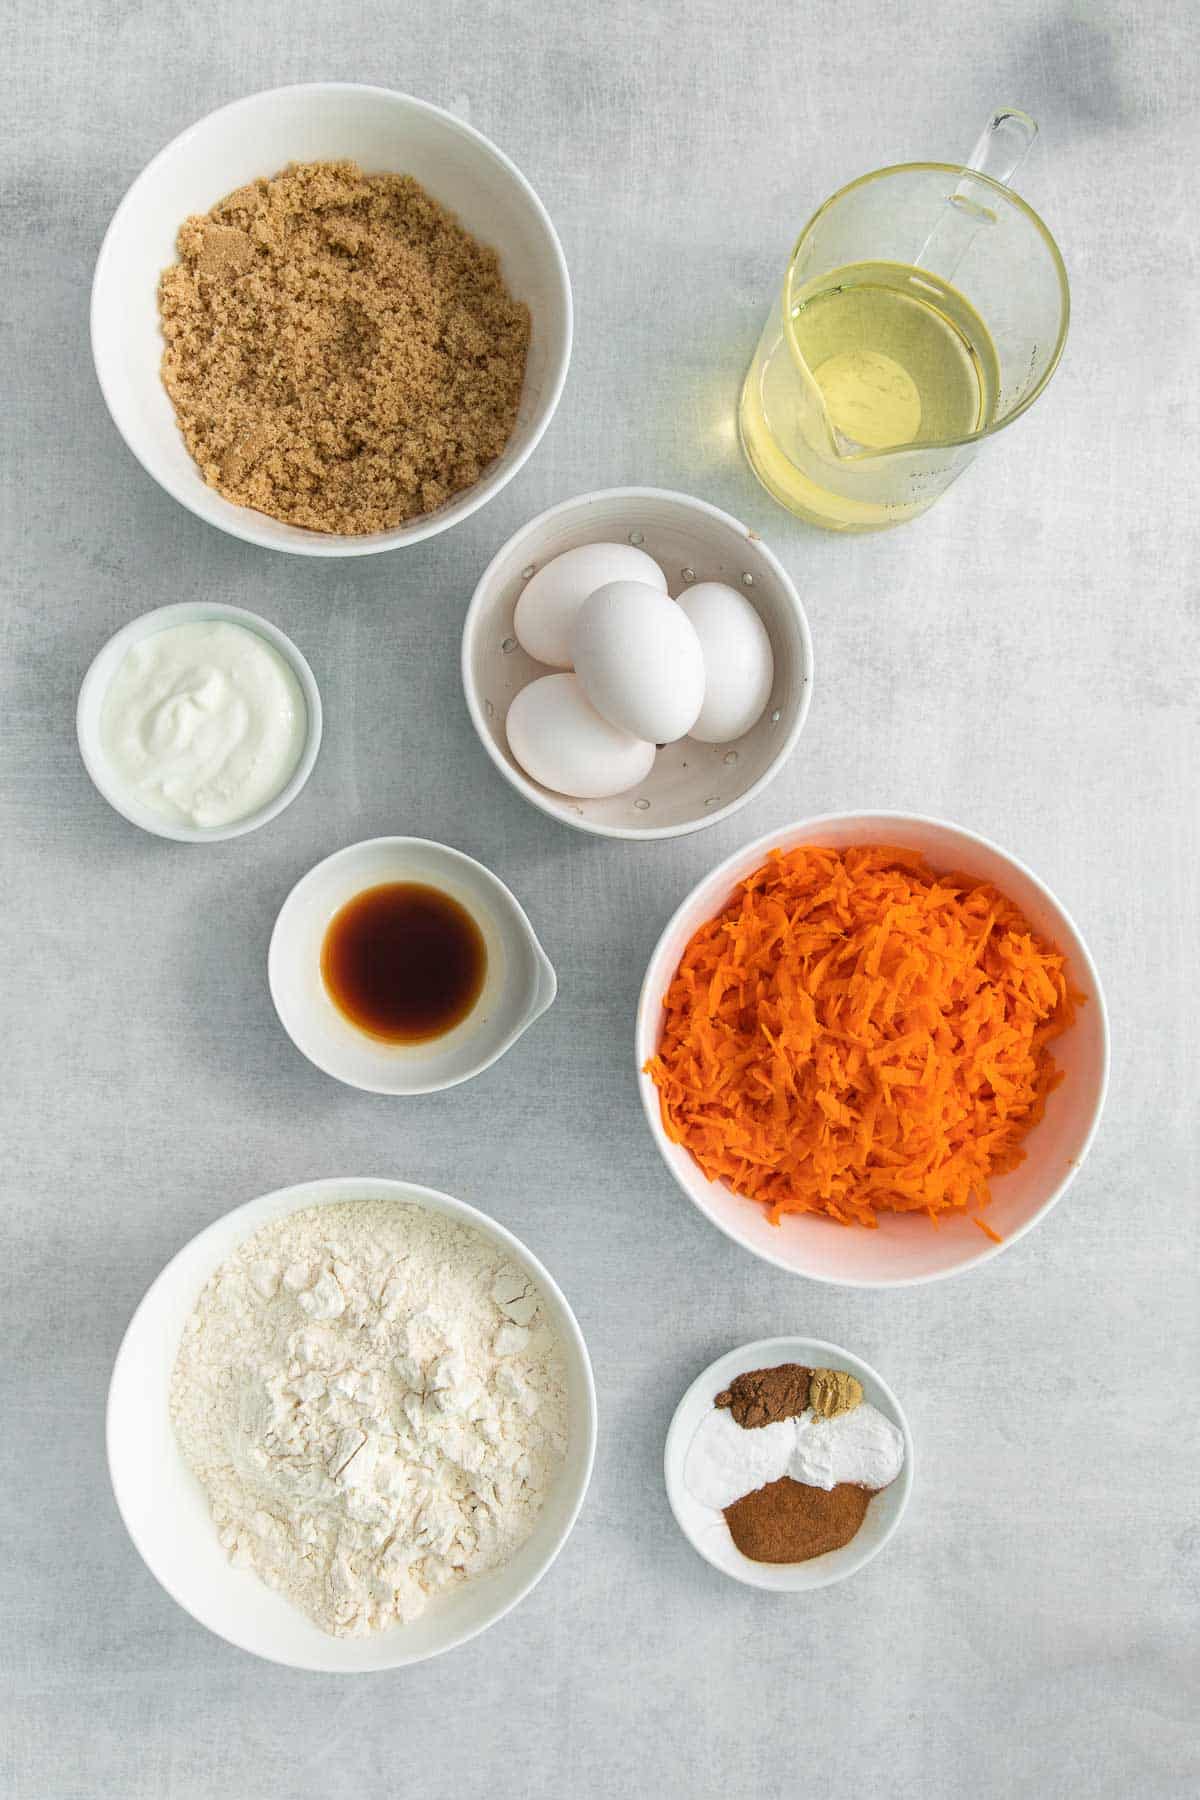 several white bowls with ingredients for carrot cake - flour, oil, brown sugar, oil, eggs, grated carrots, spices,